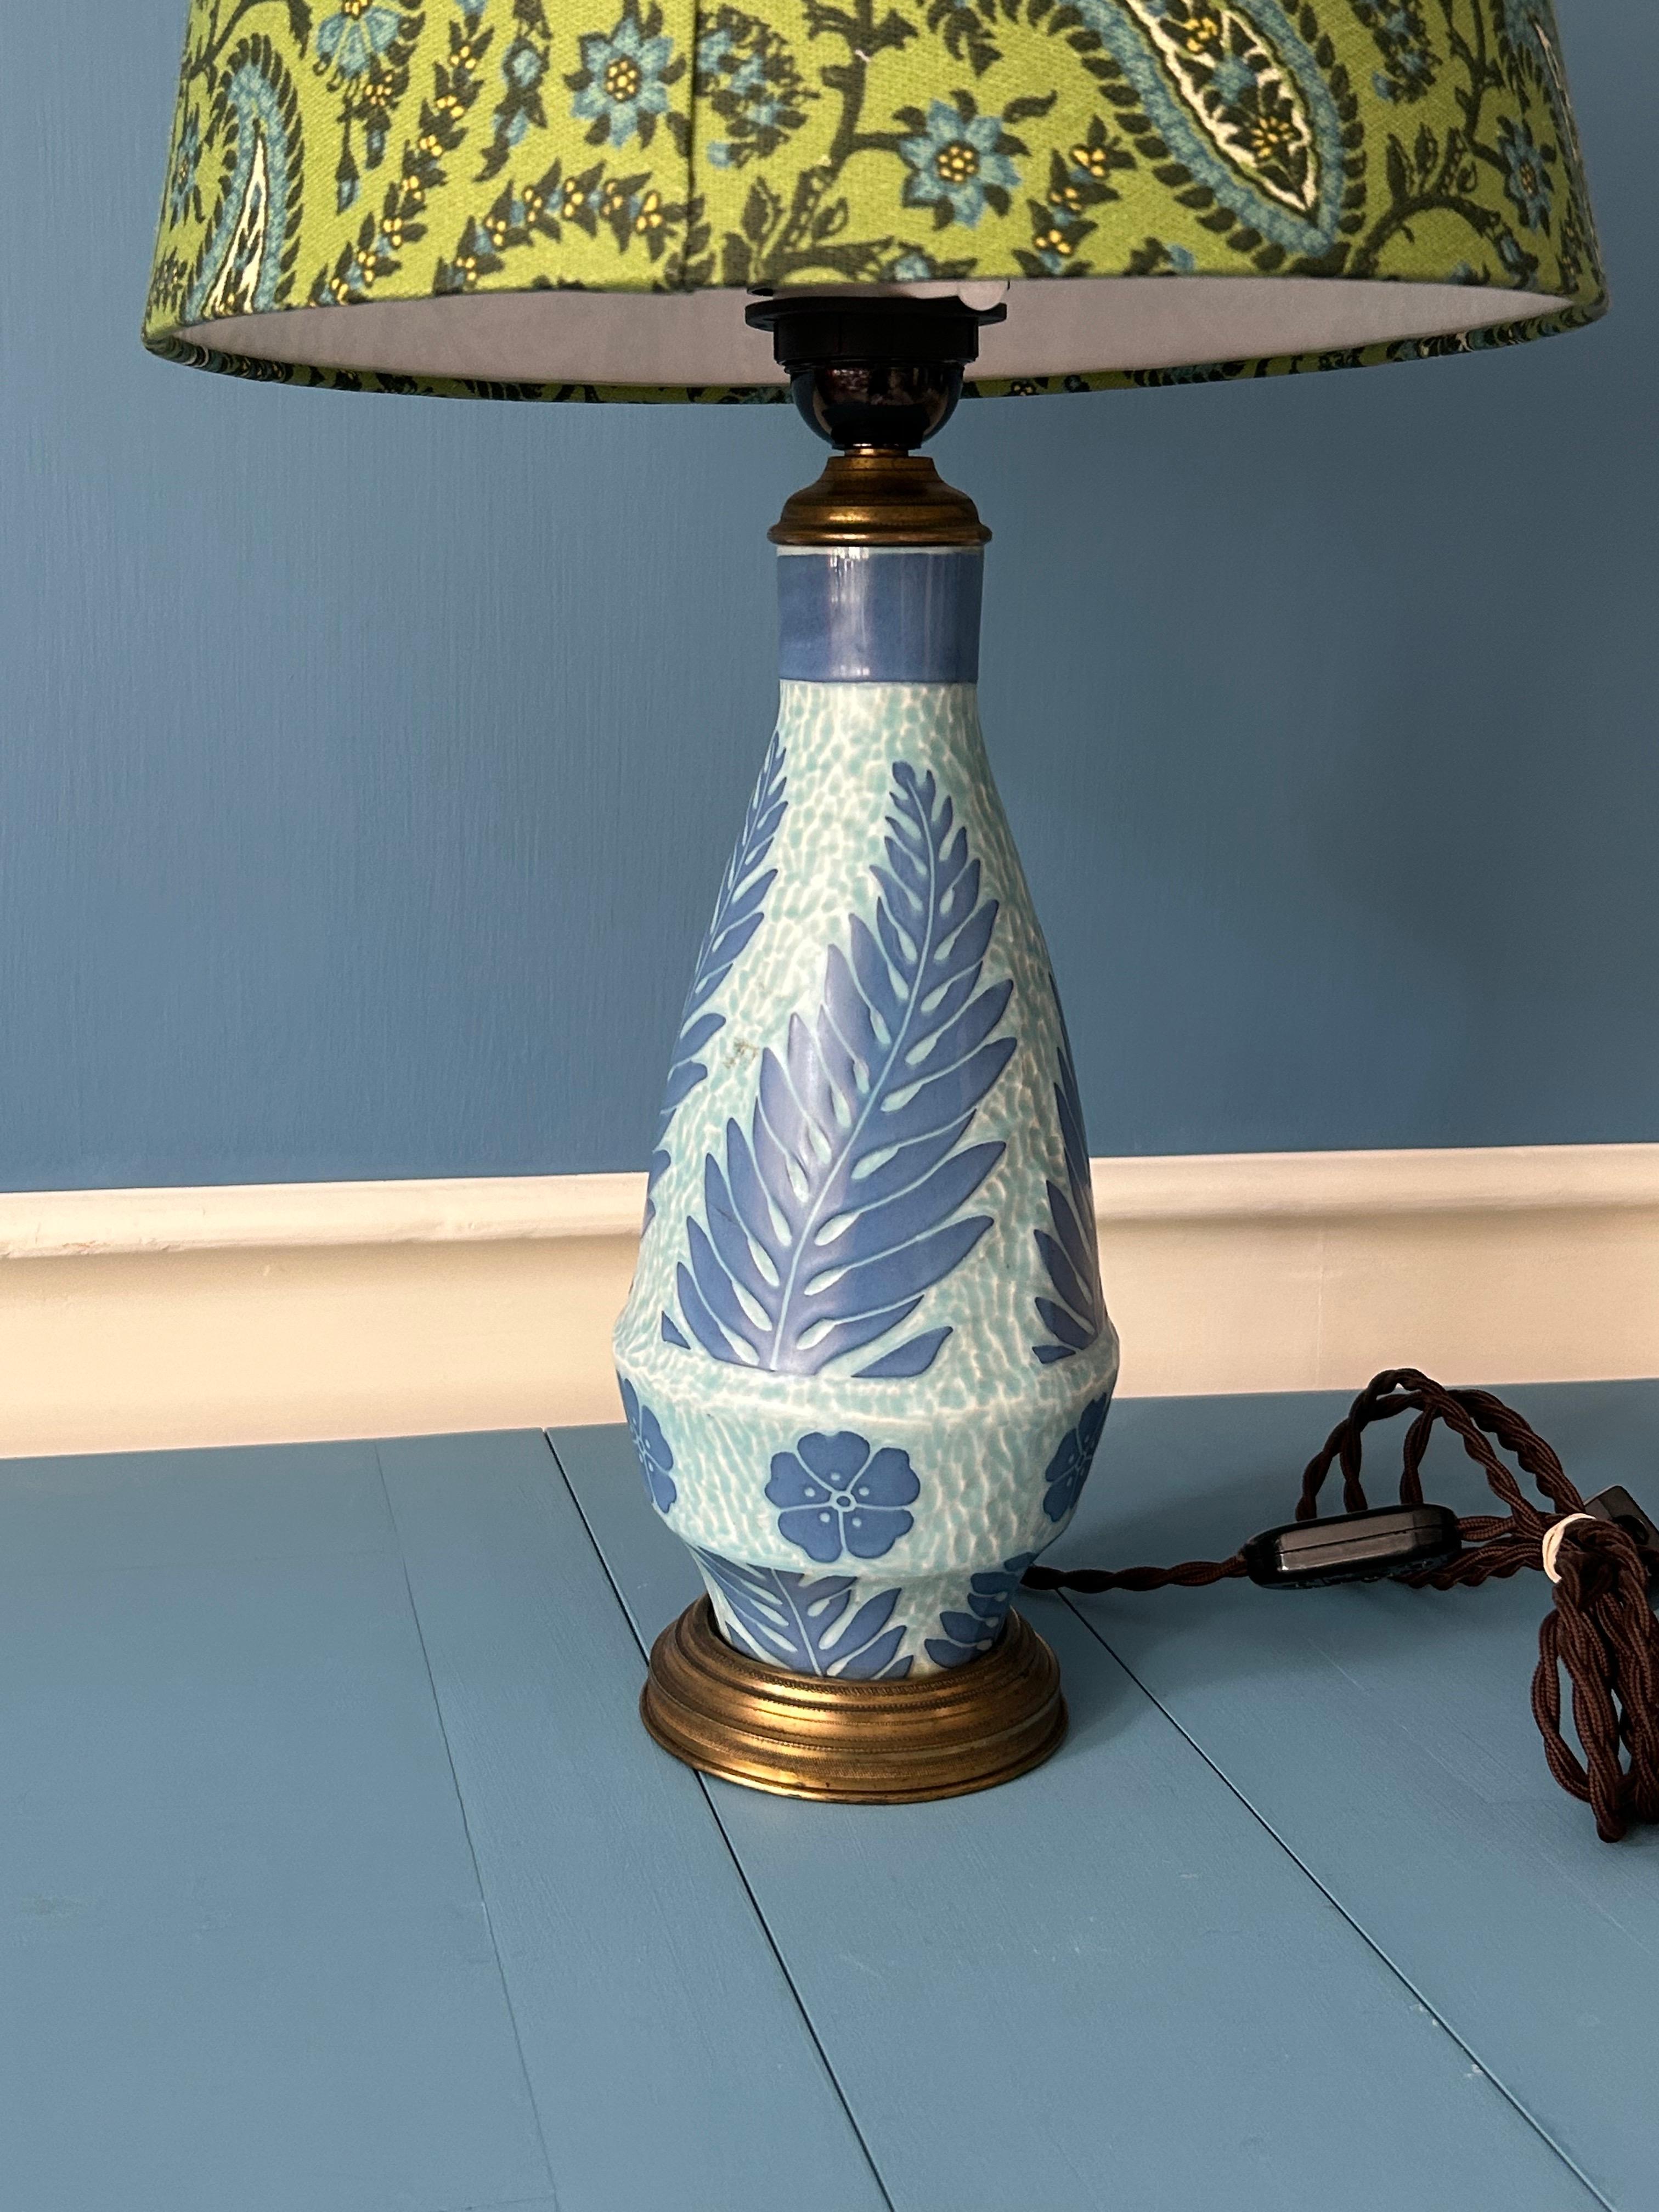 Vintage Josef Ekberg Ceramic Table Lamp with Green Shade, Sweden, 20th Century For Sale 1